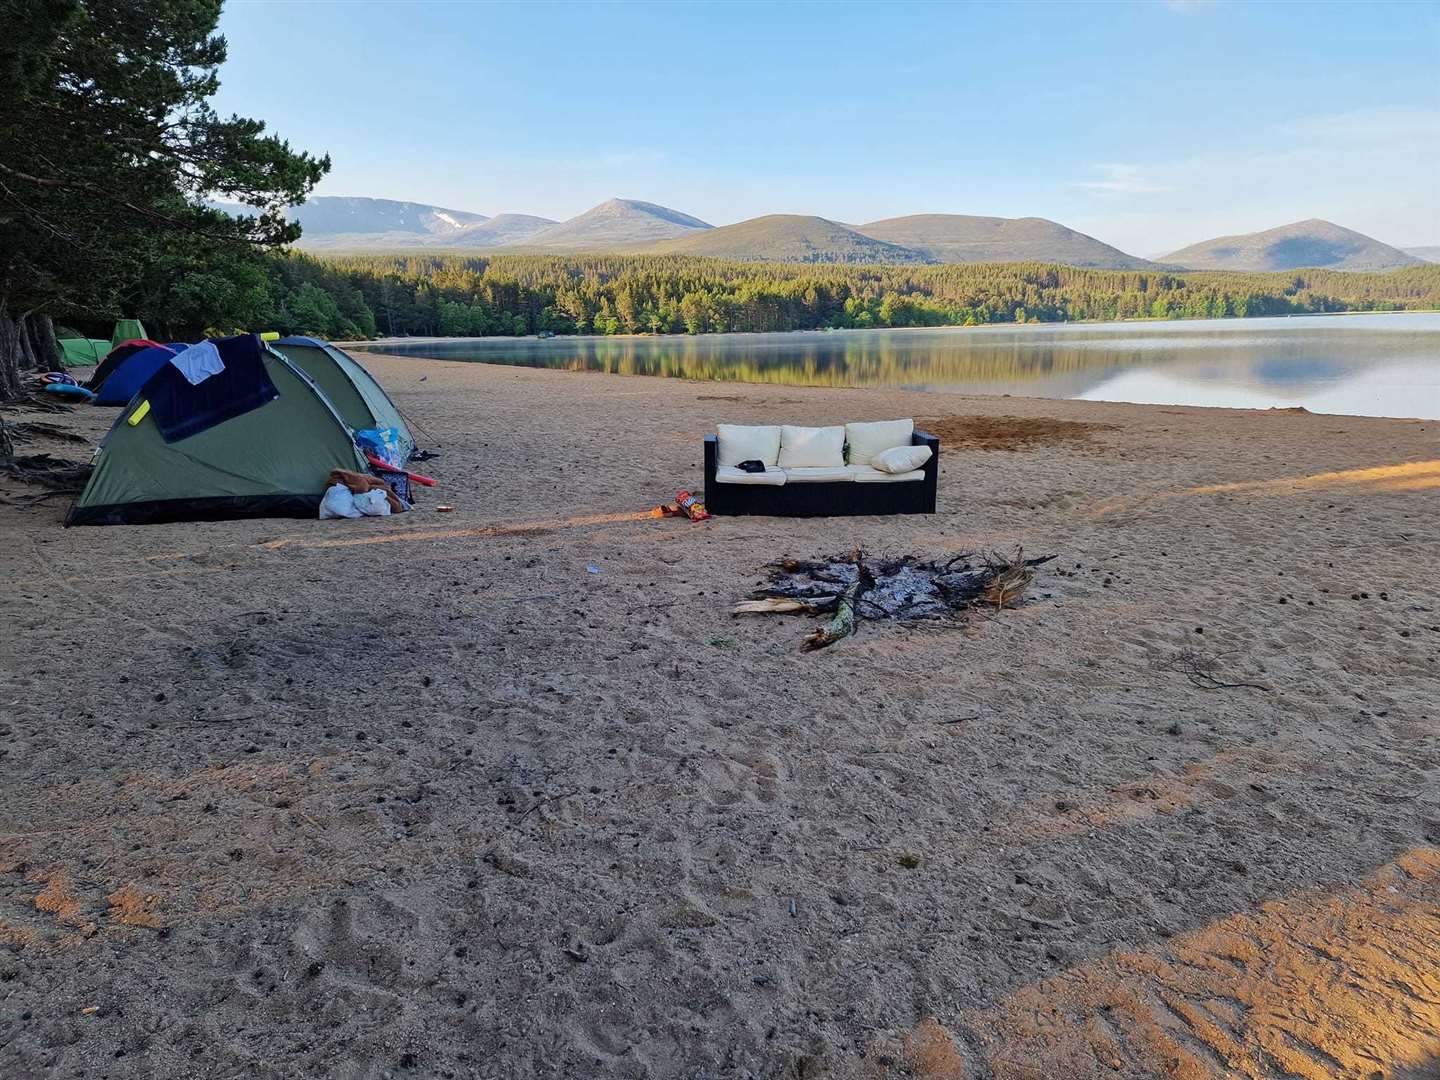 Fires were being lit at Loch Morlich beach despite signs prohibiting the practise. Picture: Julie N Duncan